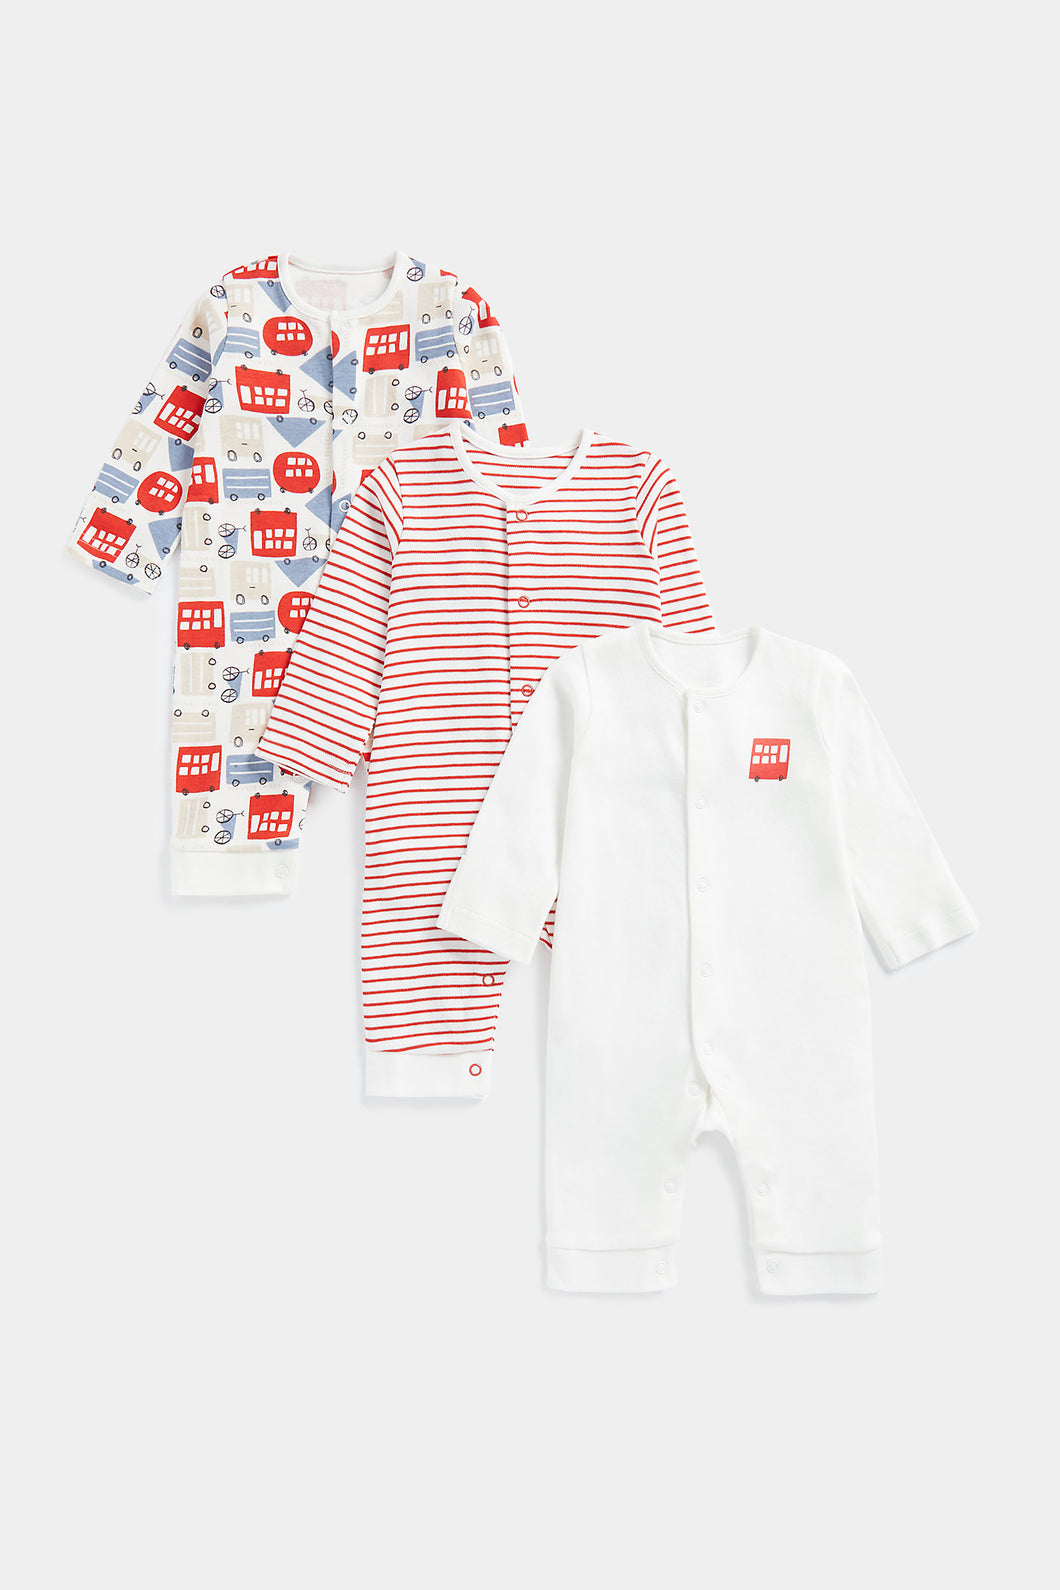 Mothercare Buses Footless Baby Sleepsuits - 3 Pack